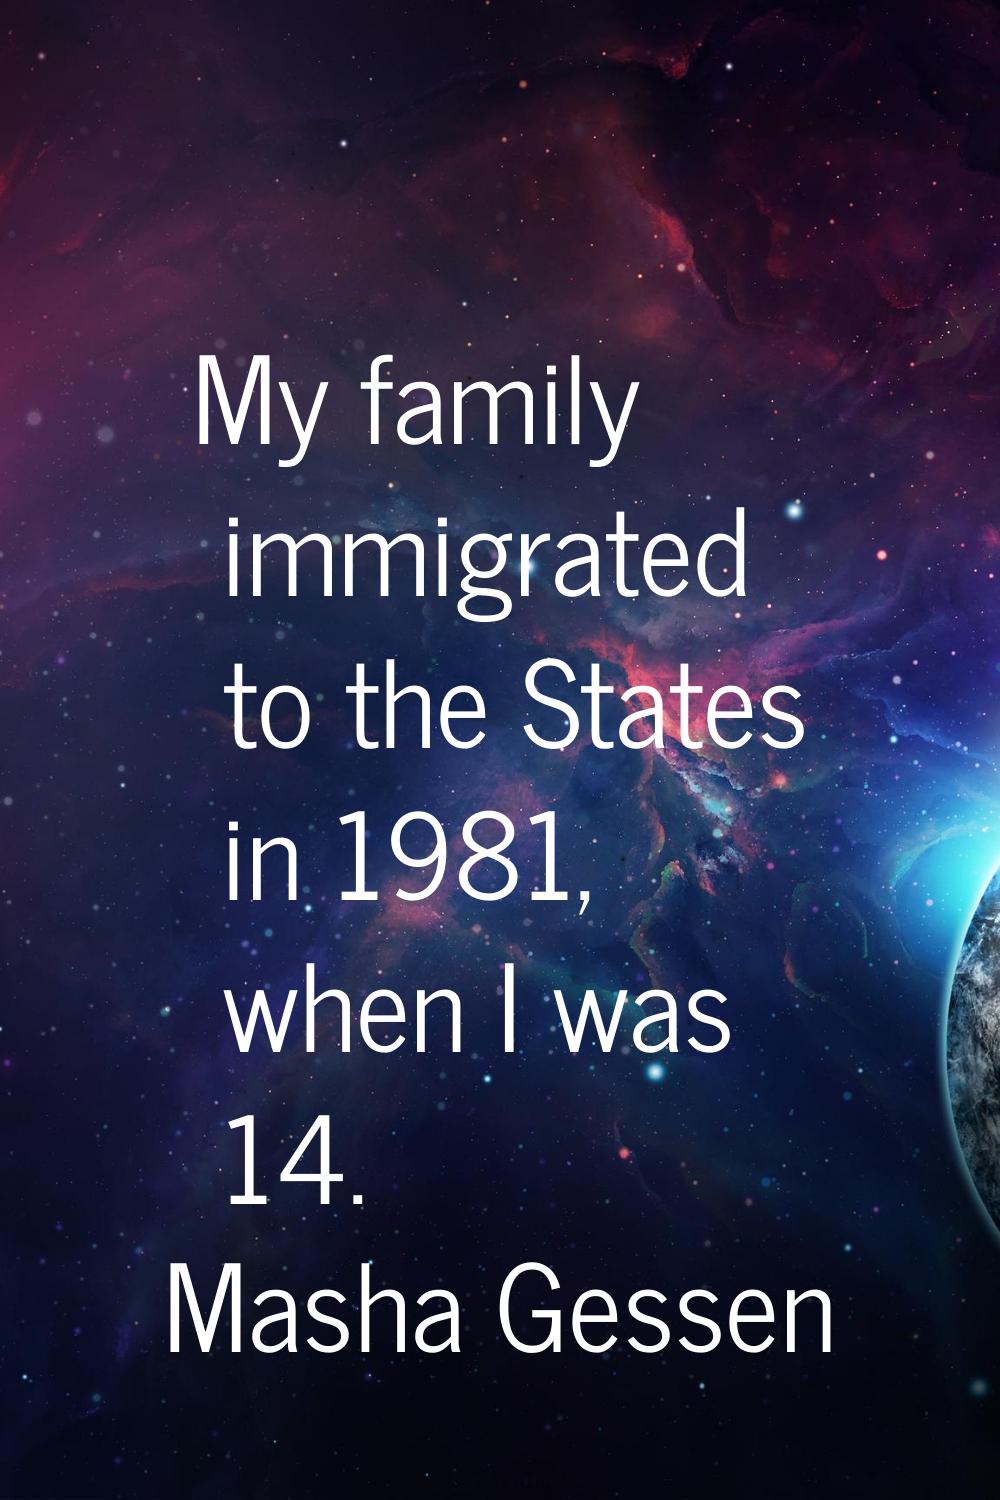 My family immigrated to the States in 1981, when I was 14.